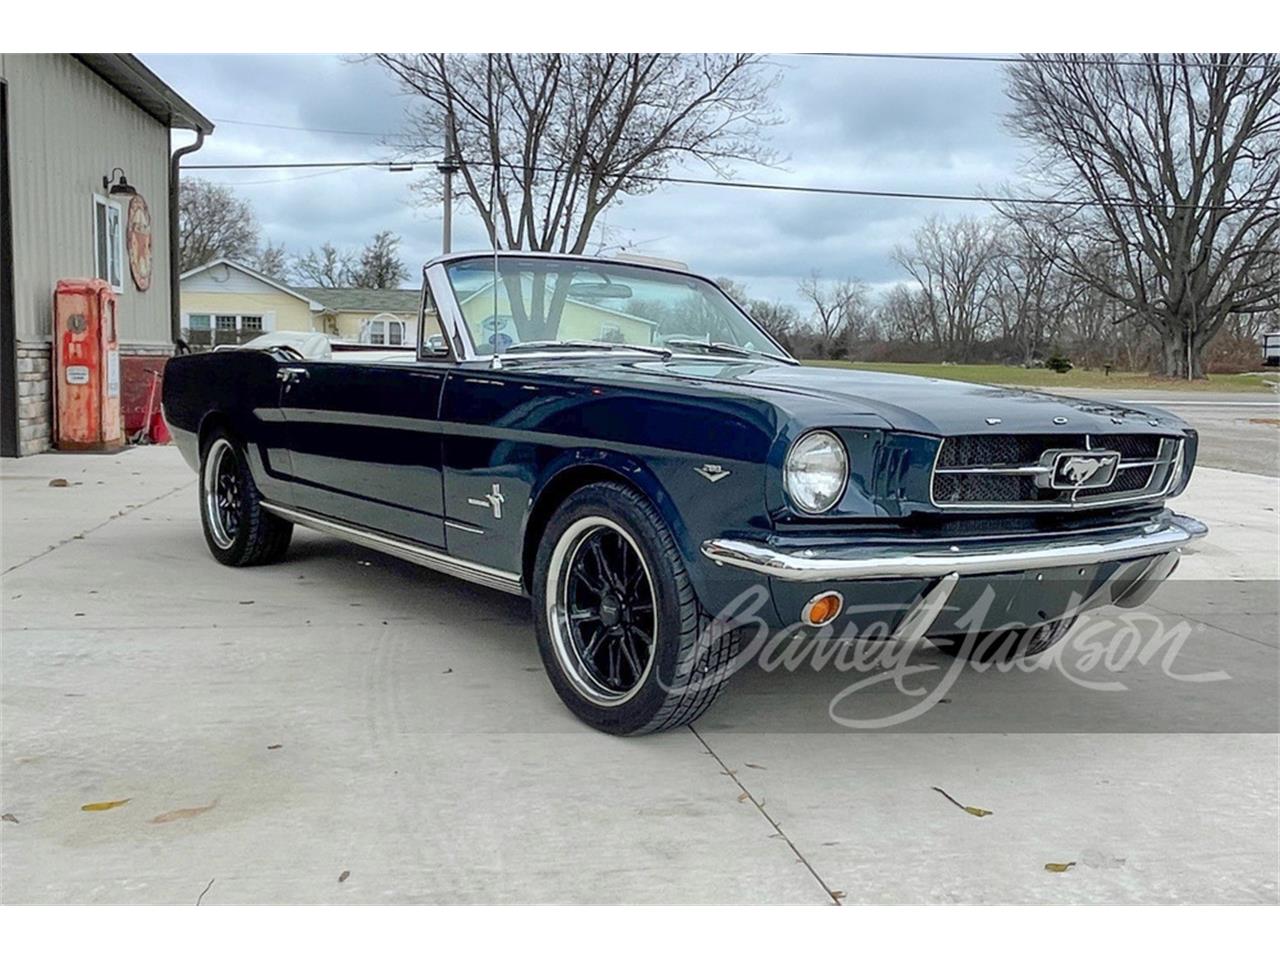 For Sale at Auction: 1965 Ford Mustang in Scottsdale, Arizona for sale in Scottsdale, AZ